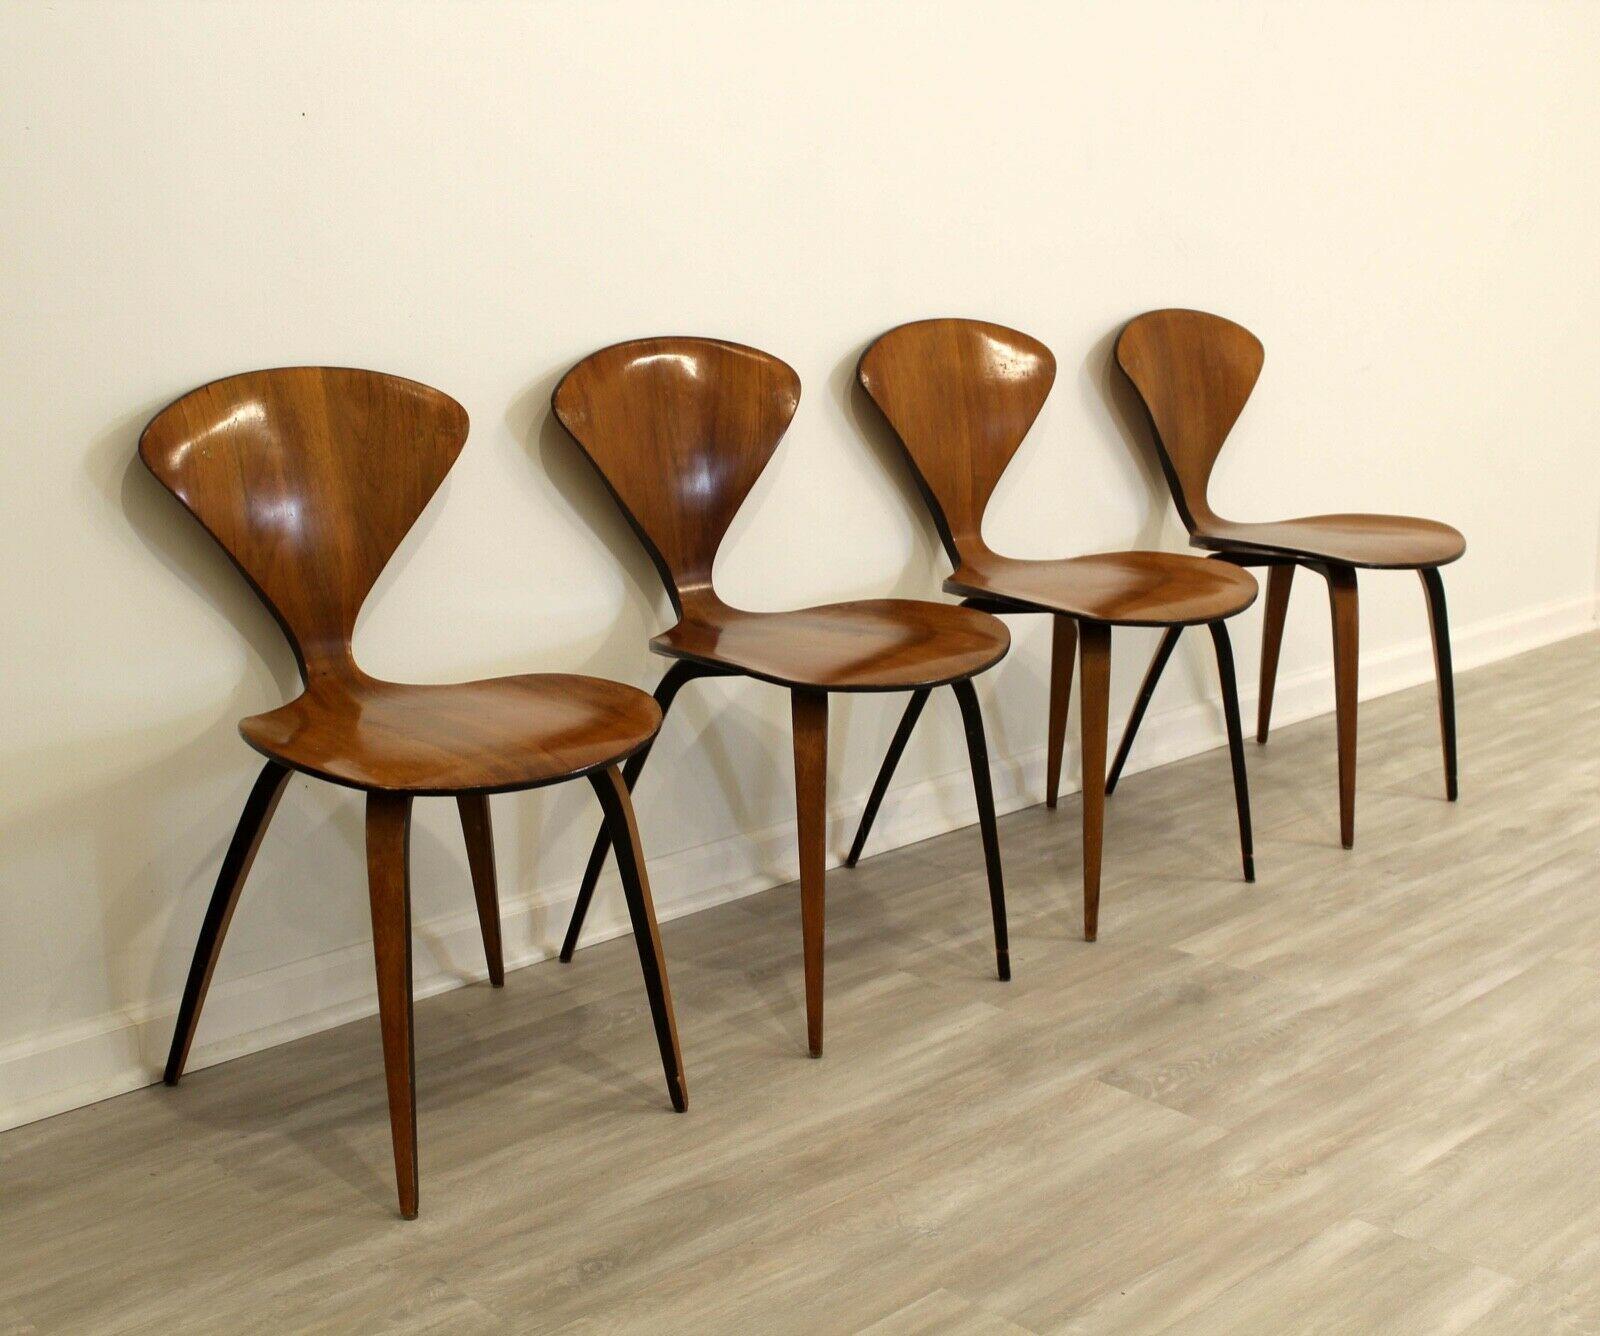 This set of four 1950's Modern-style side chairs are designed by Bernardo for Plycraft Inc. The chairs are made from molded bent plywood with the original walnut stain with black accents on the edges and a polished finish. The chars have a triangle